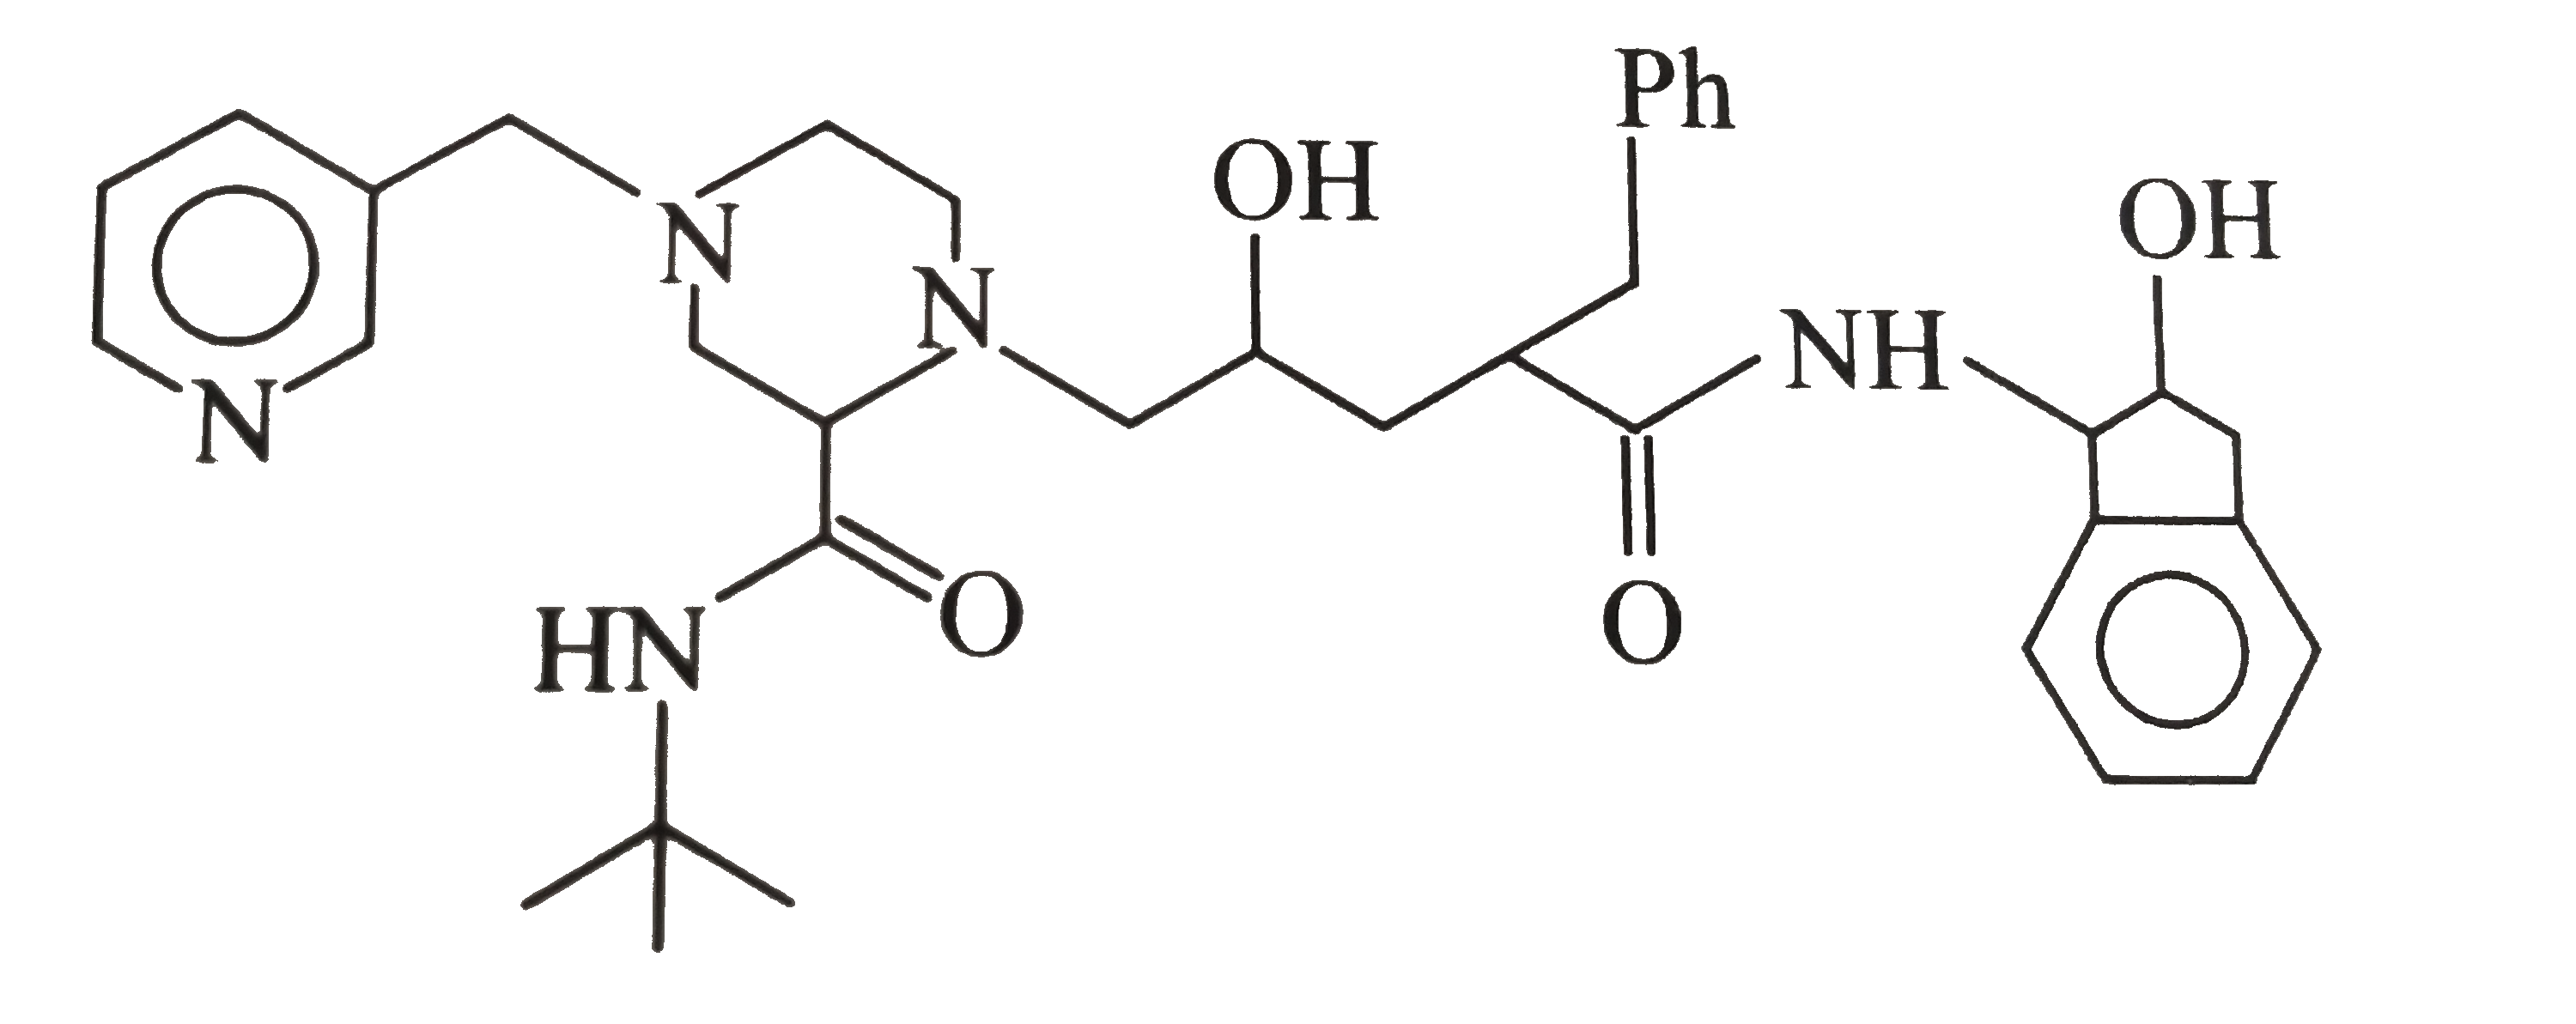 Crixivan, a drug produced by Merck and Co., is widely used in the fight at against AIDS (acquied immune dificiency syndrome). The sturcture of cirxivan is given below:      How many 2^(@) amine groups are present in the compound ?